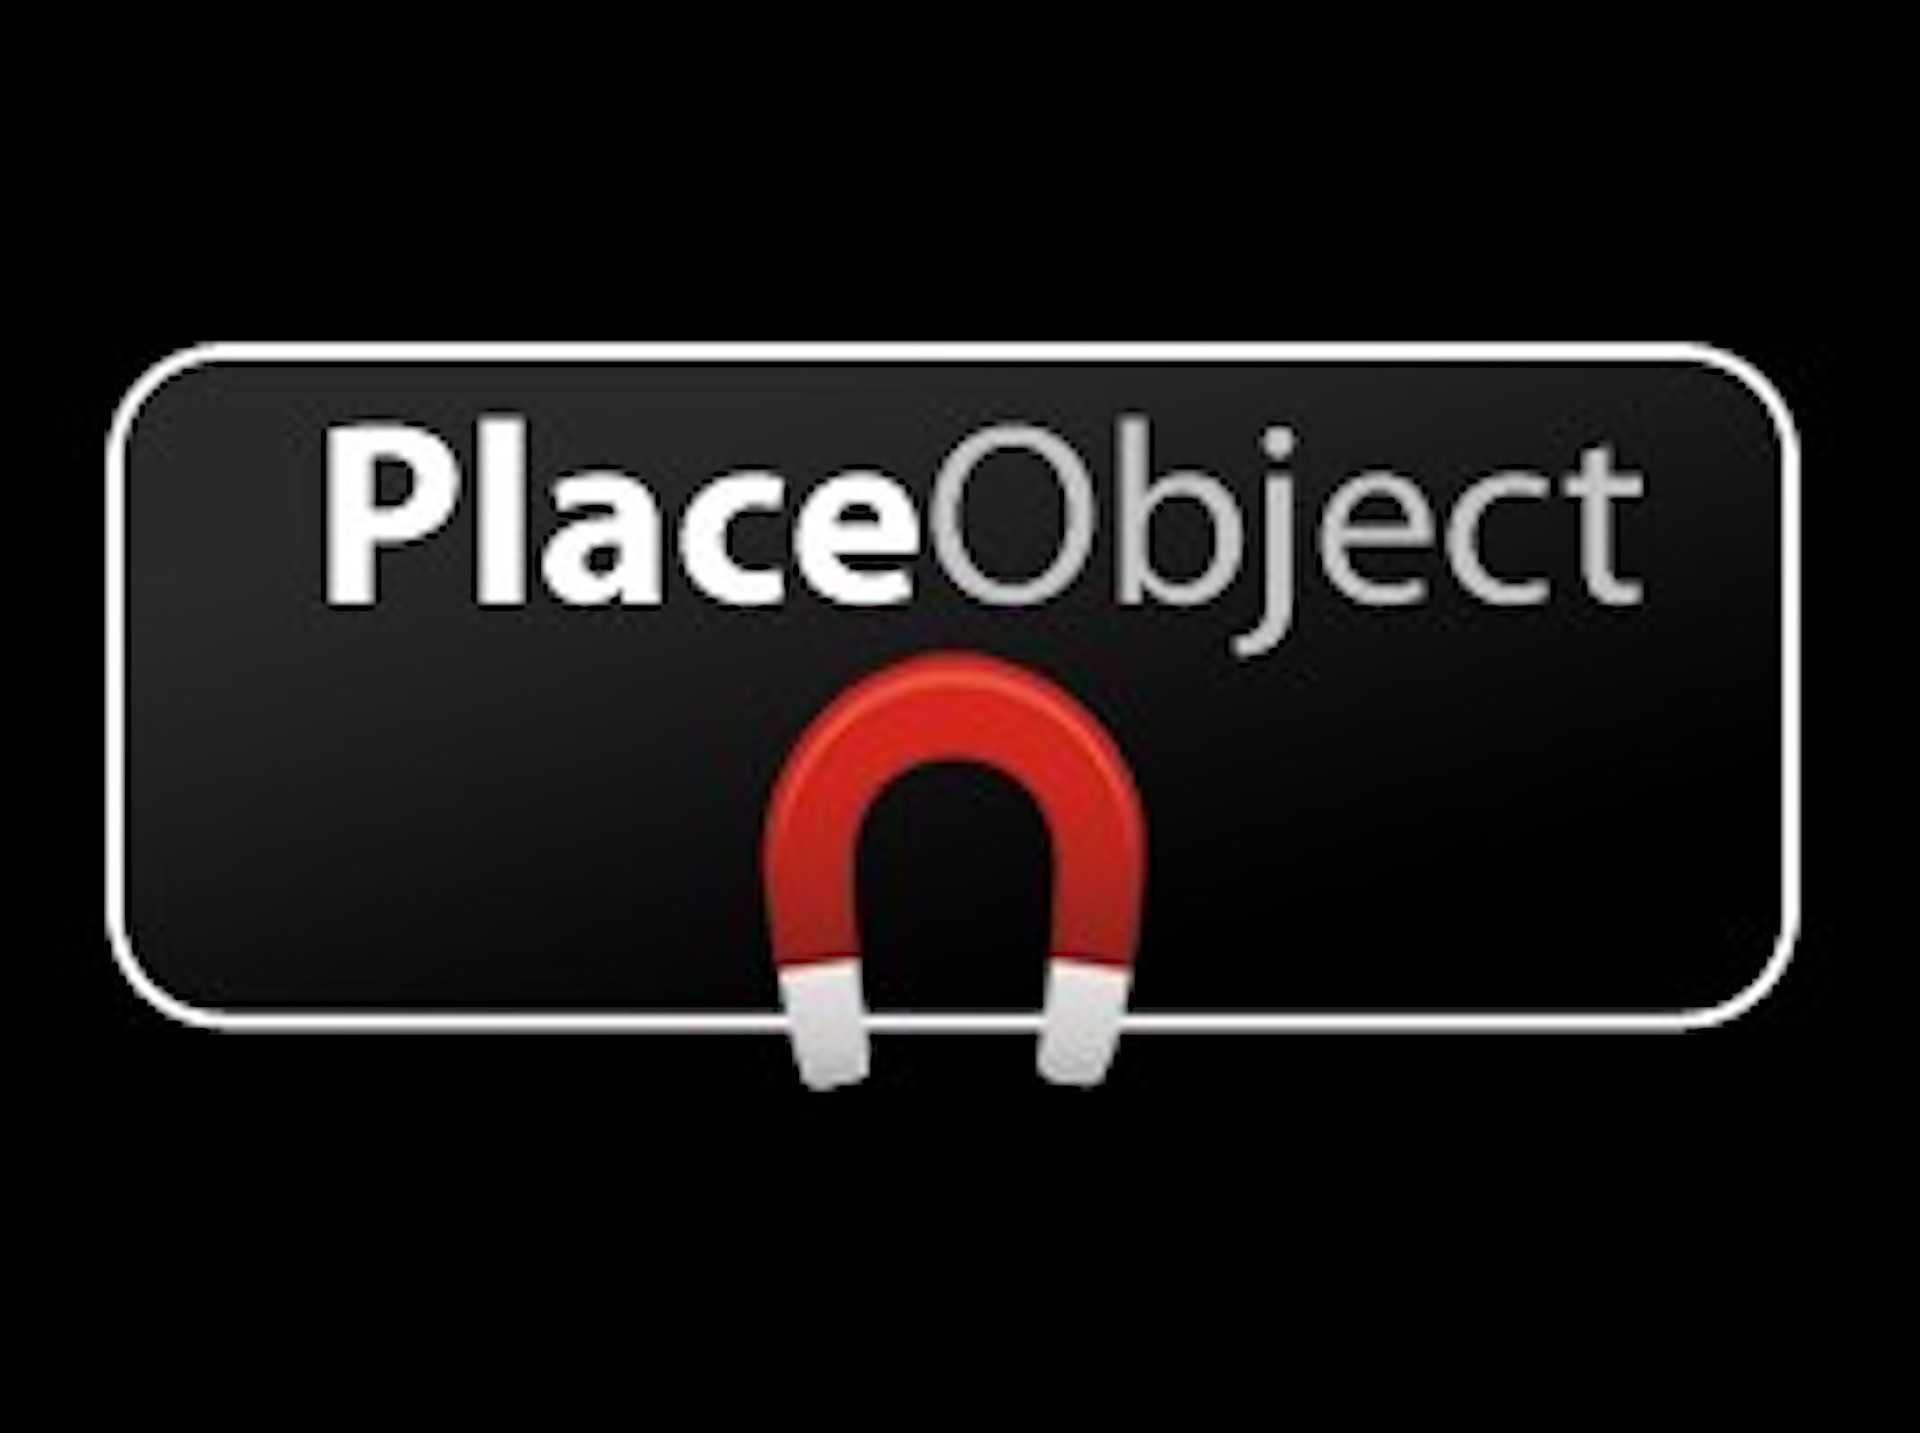 Replace object